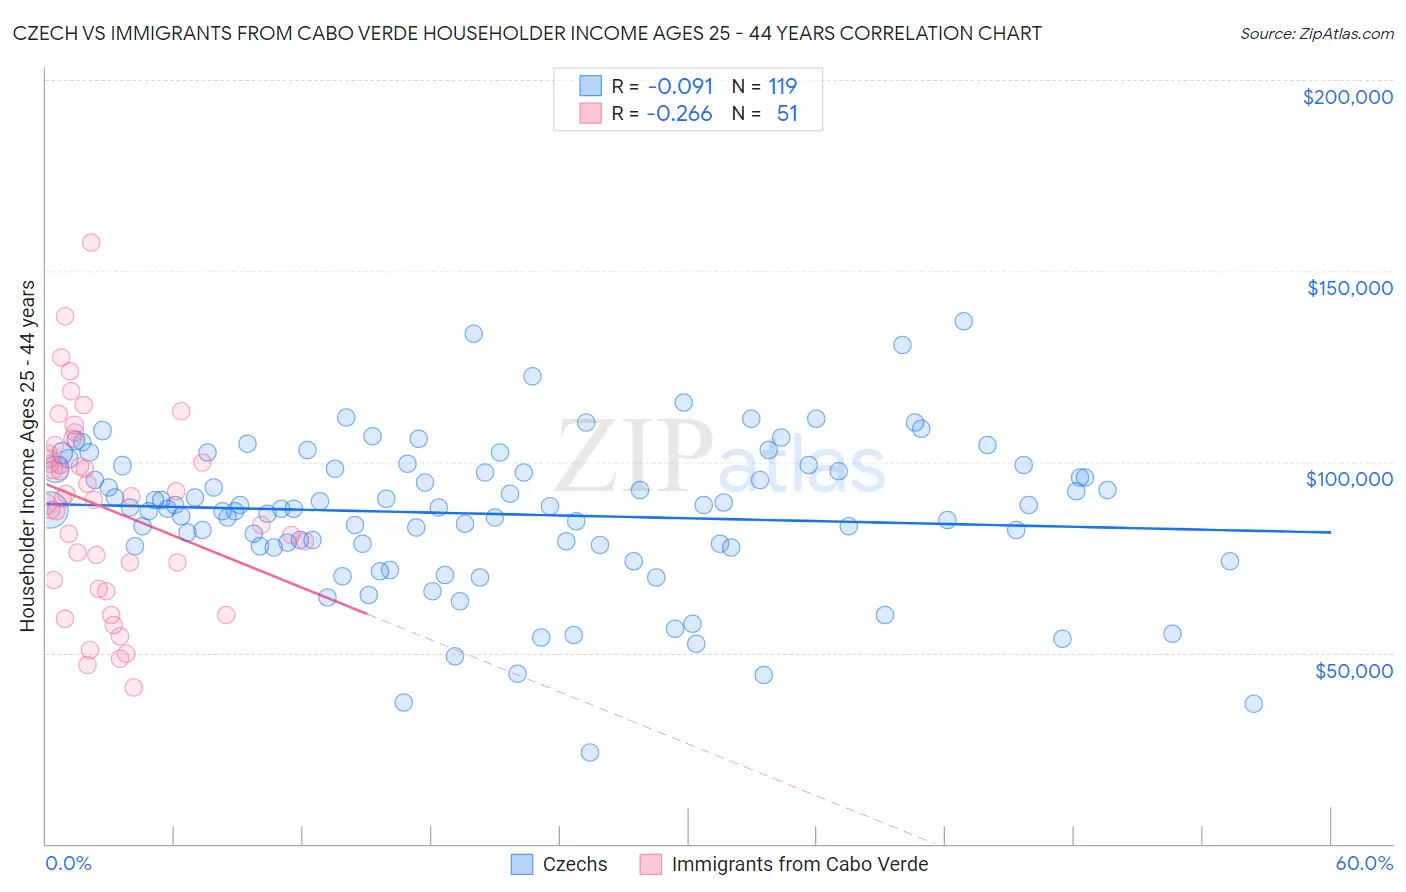 Czech vs Immigrants from Cabo Verde Householder Income Ages 25 - 44 years